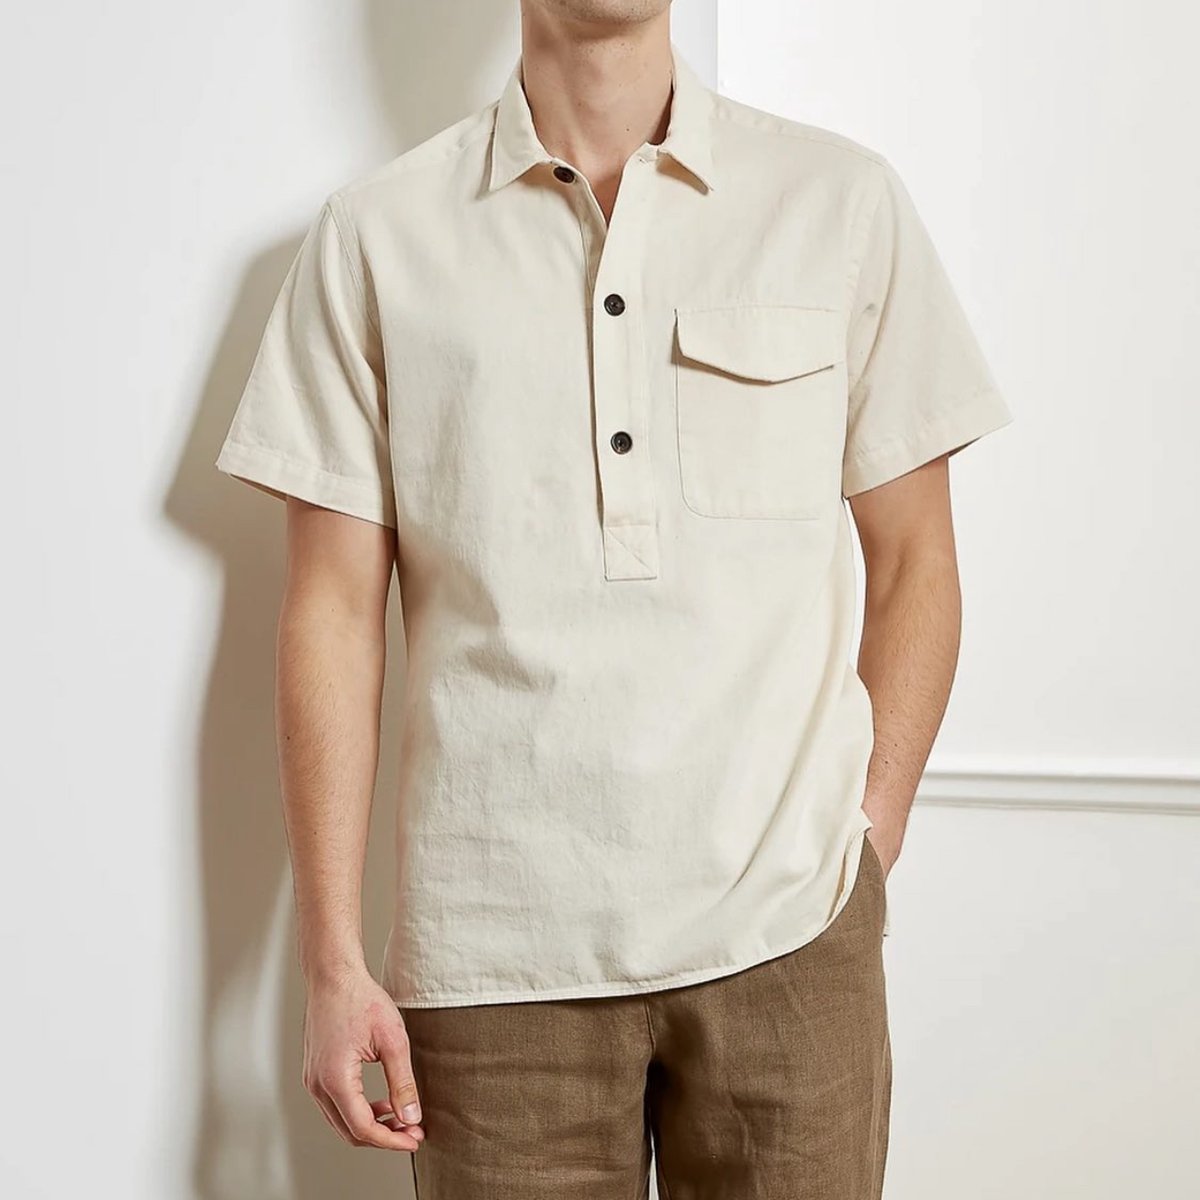 Your summer shirt! Perfect for any occasion, the Oliver Spencer dock popover is casual , easy to wear and timeless. Shop all SS21 online and in store 👋🏼